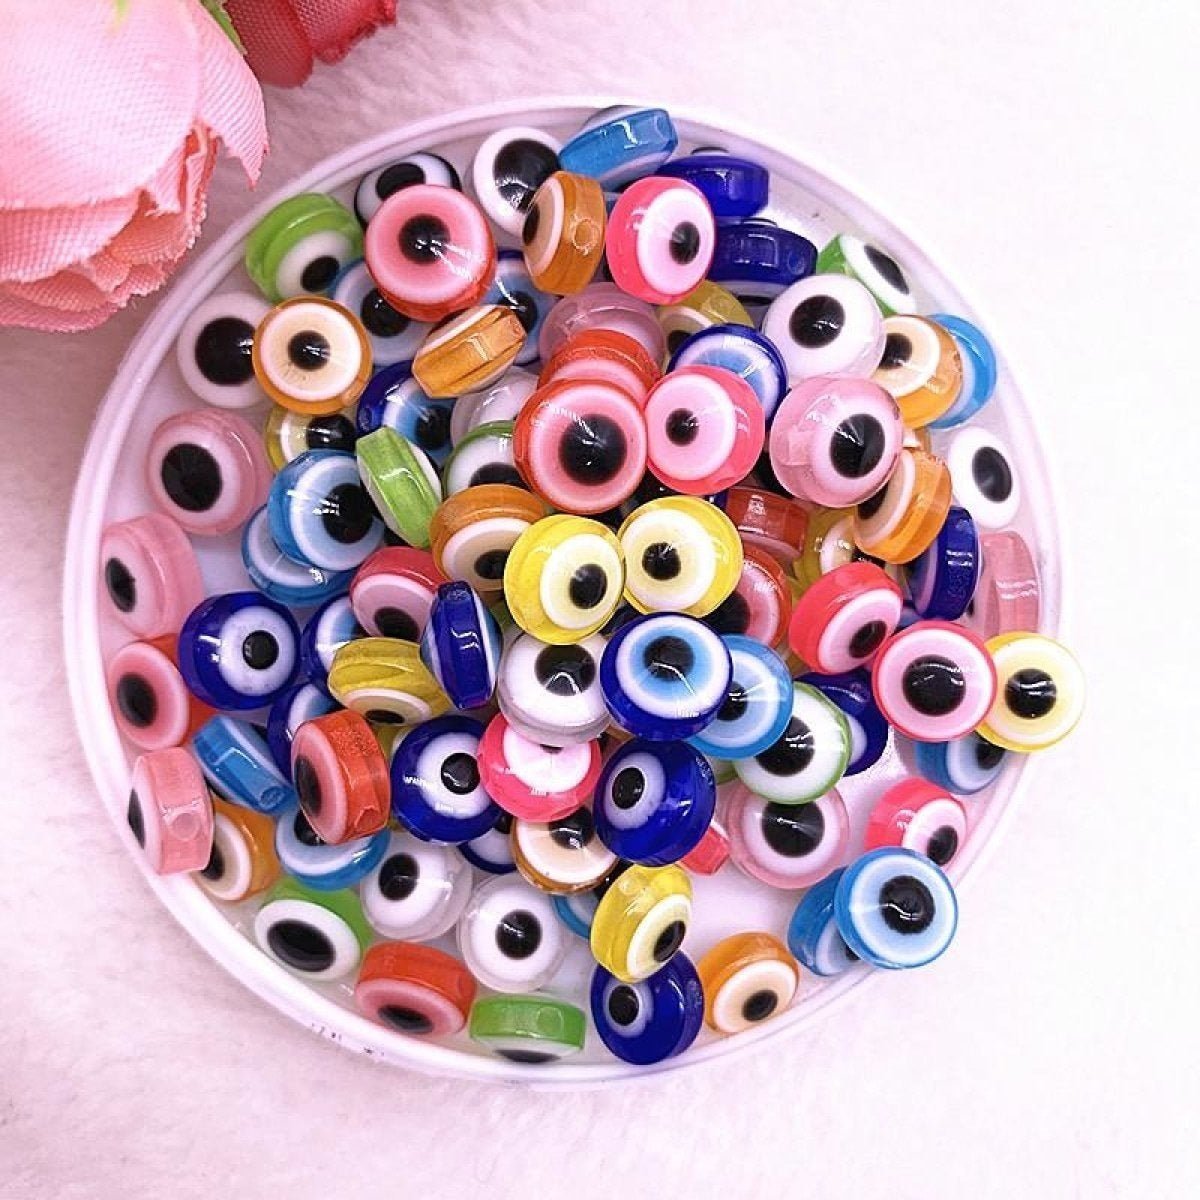 48pcs 8/10mm Resin Spacer Beads Double Sided Eyes for Jewellery Making DIY Bracelet Beads Flat Backed - Multicoloured 8mm - - Asia Sell